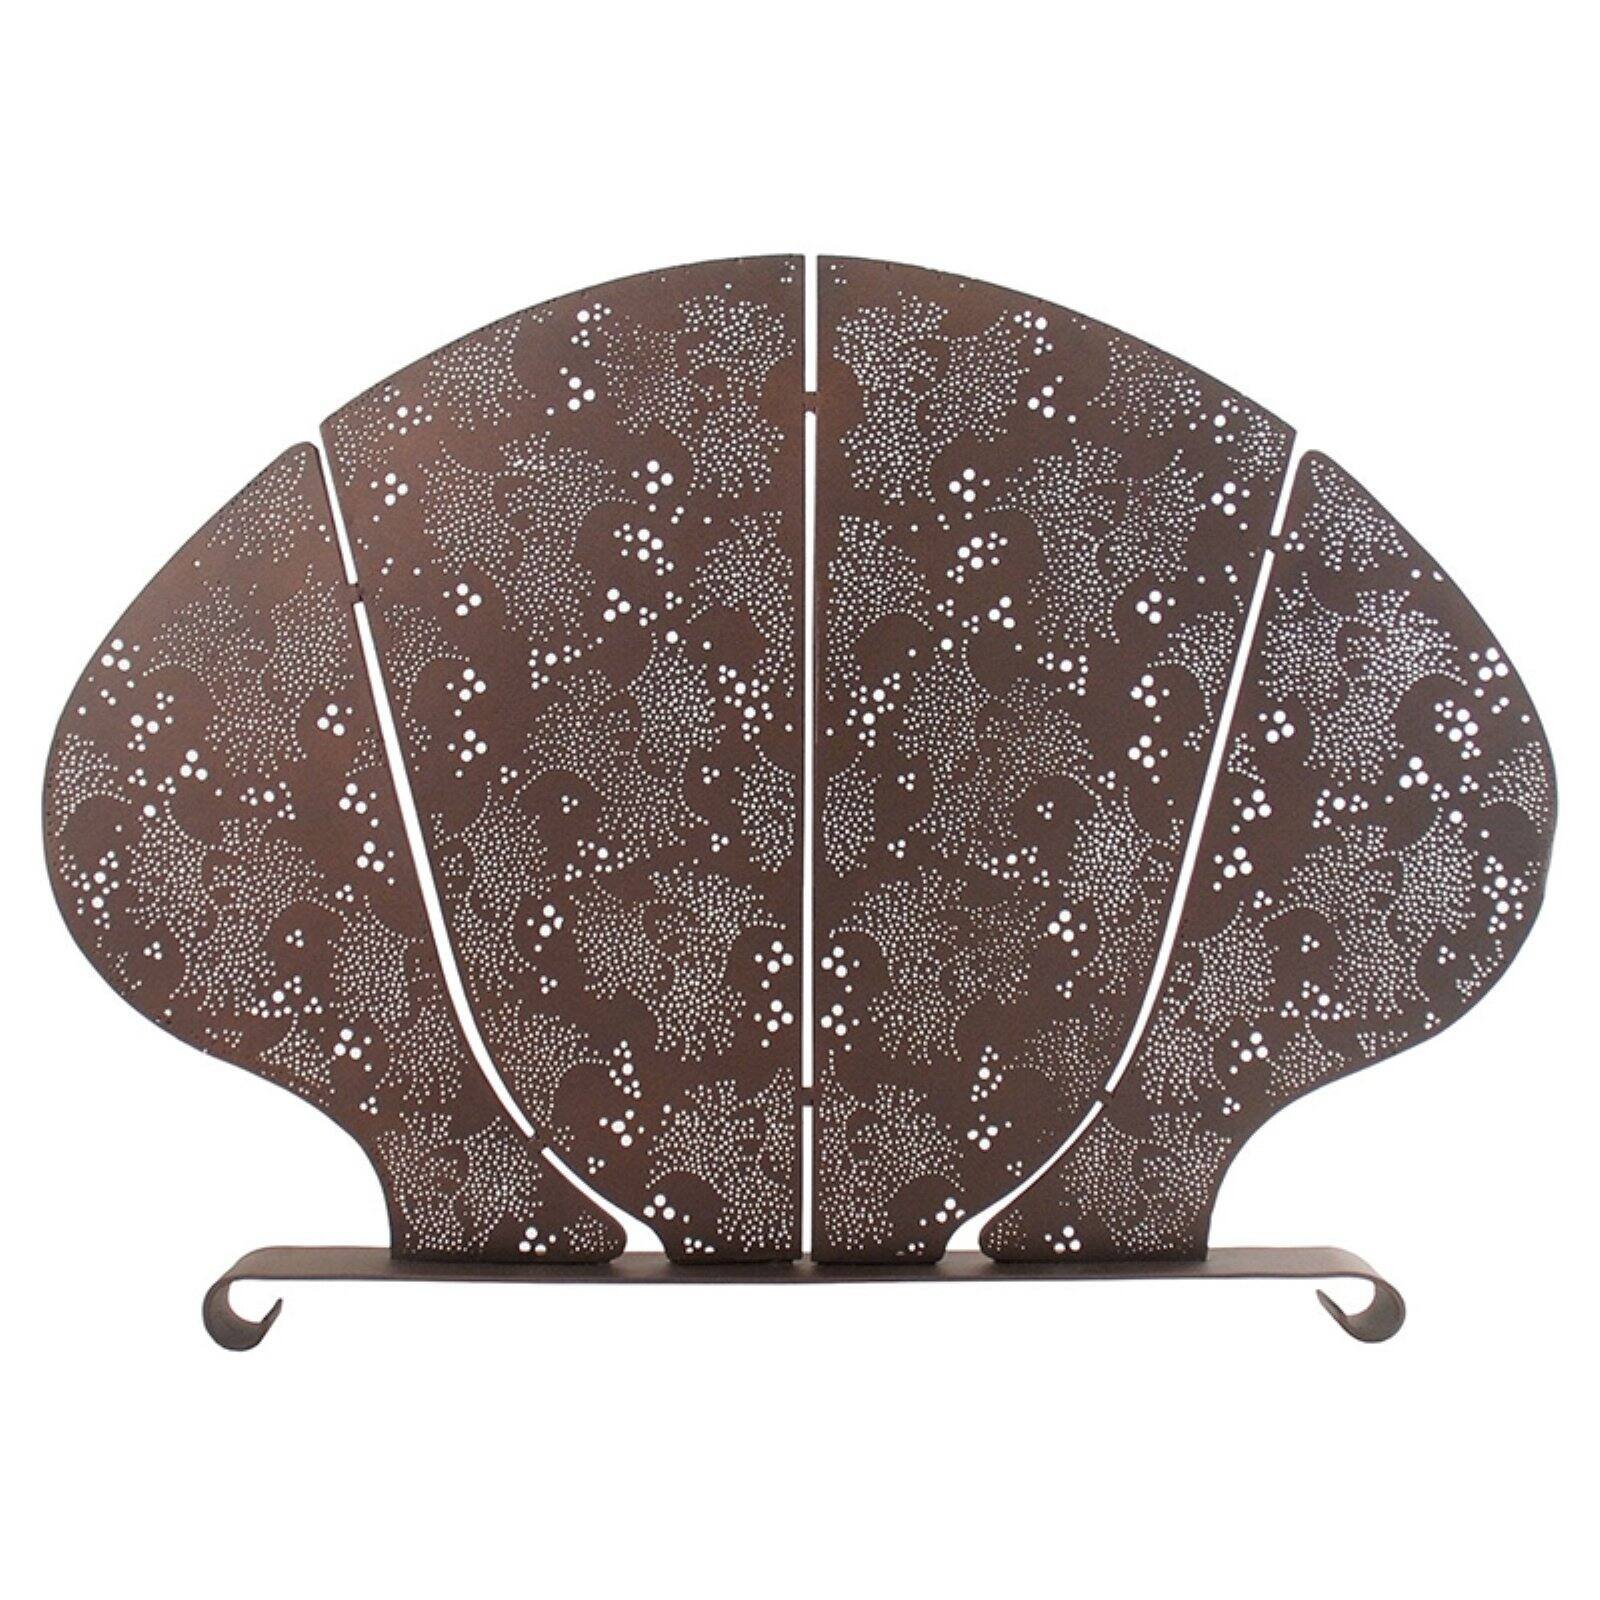 Achla Designs Stardust Summer Fireplace Screen - image 1 of 3